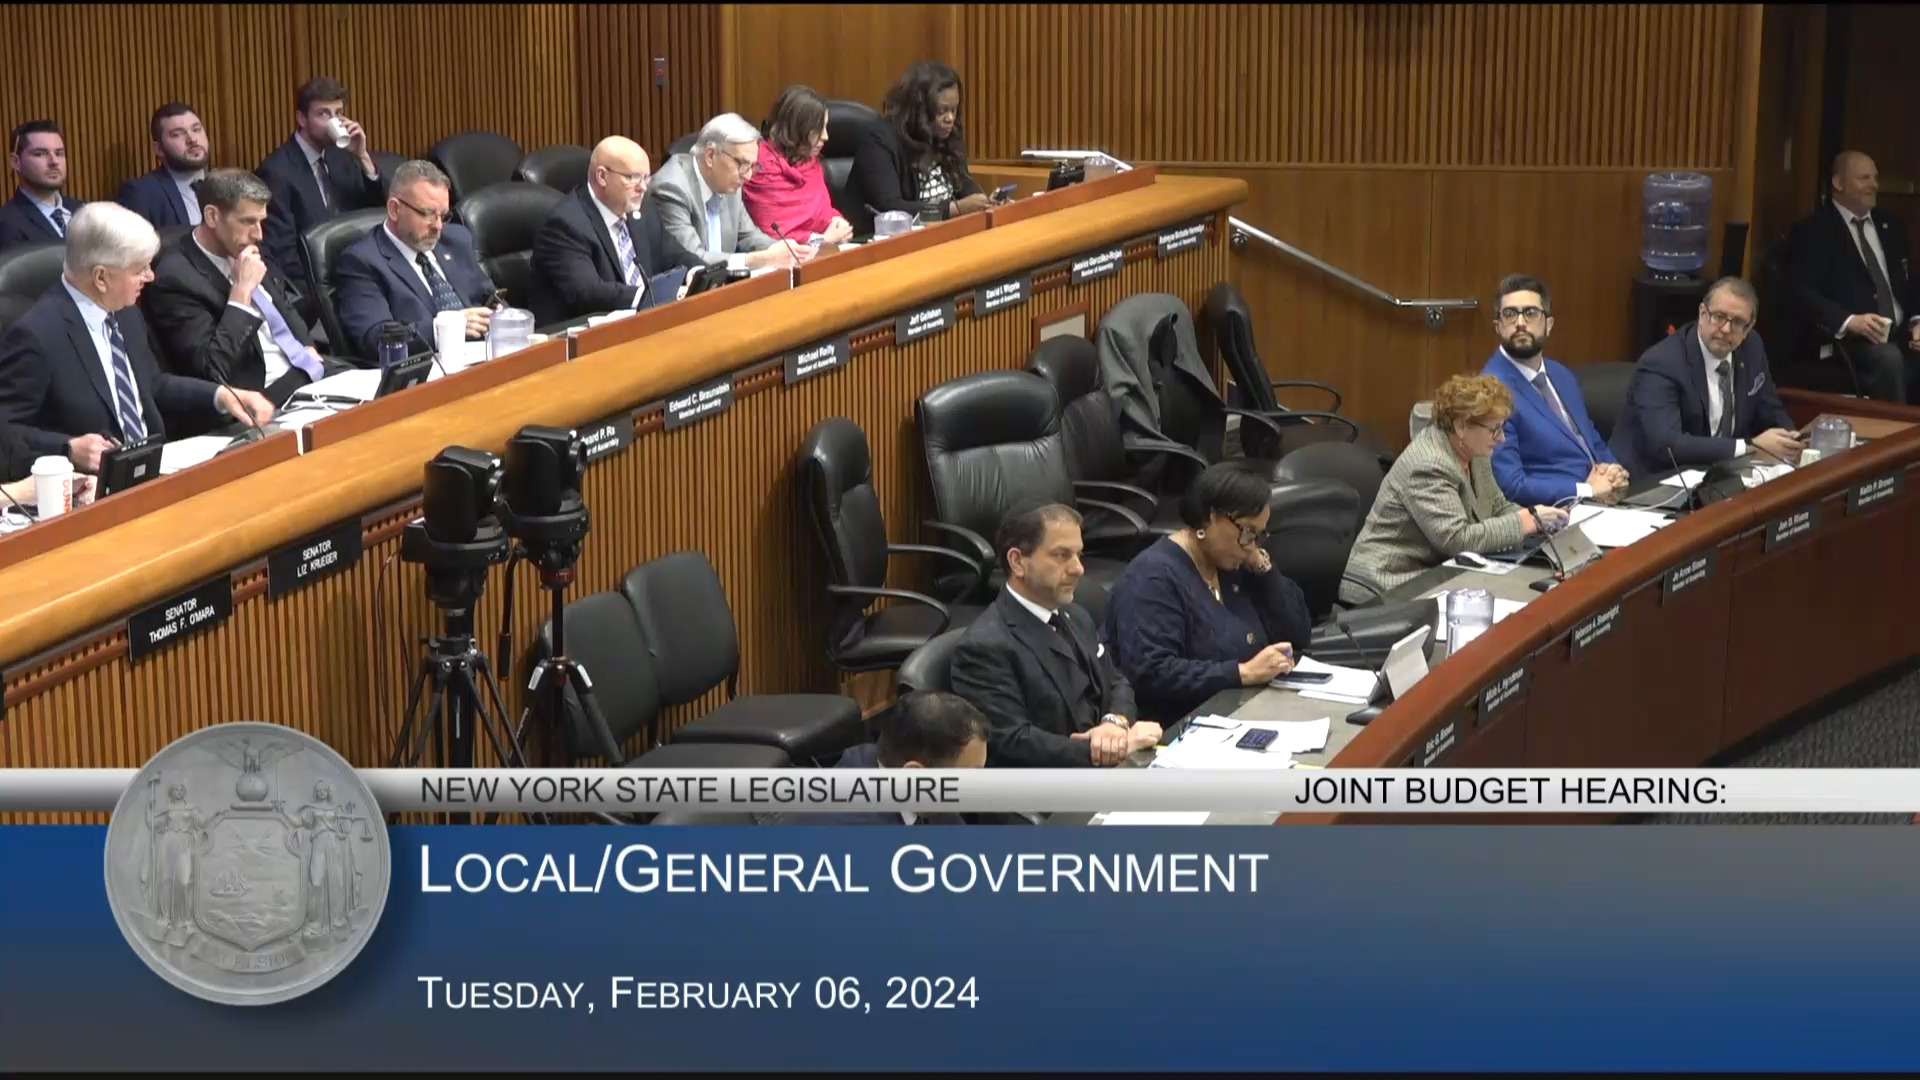 Mayor Adams Testifies During Budget Hearing on Local/General Government